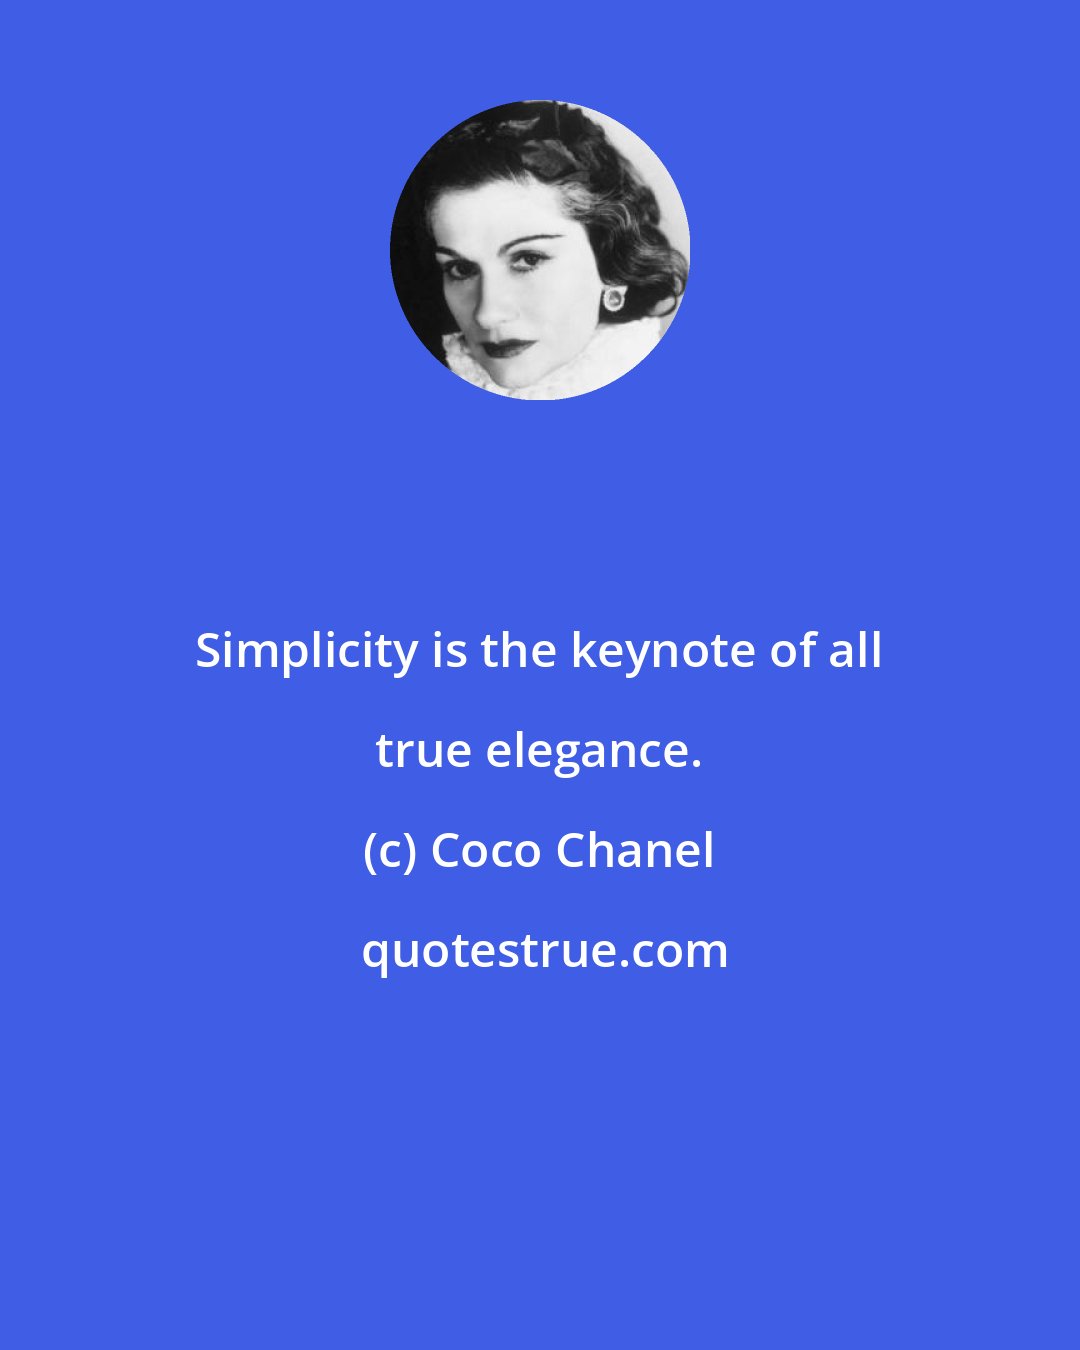 Coco Chanel: Simplicity is the keynote of all true elegance.